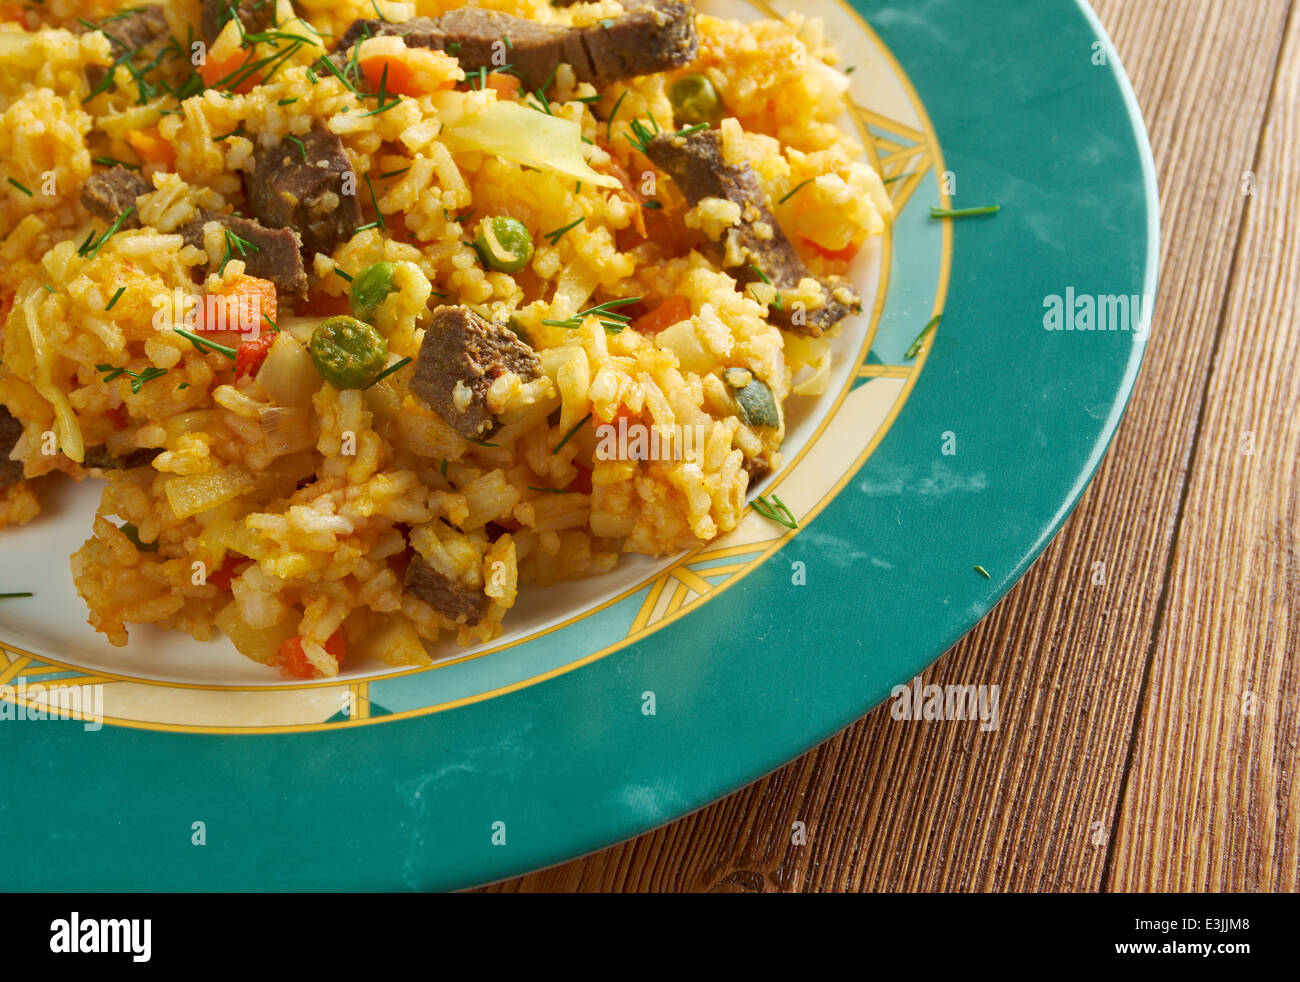 arroz chino colombiana - Fried Rice with Vegetables and Meat.southern food Stock Photo